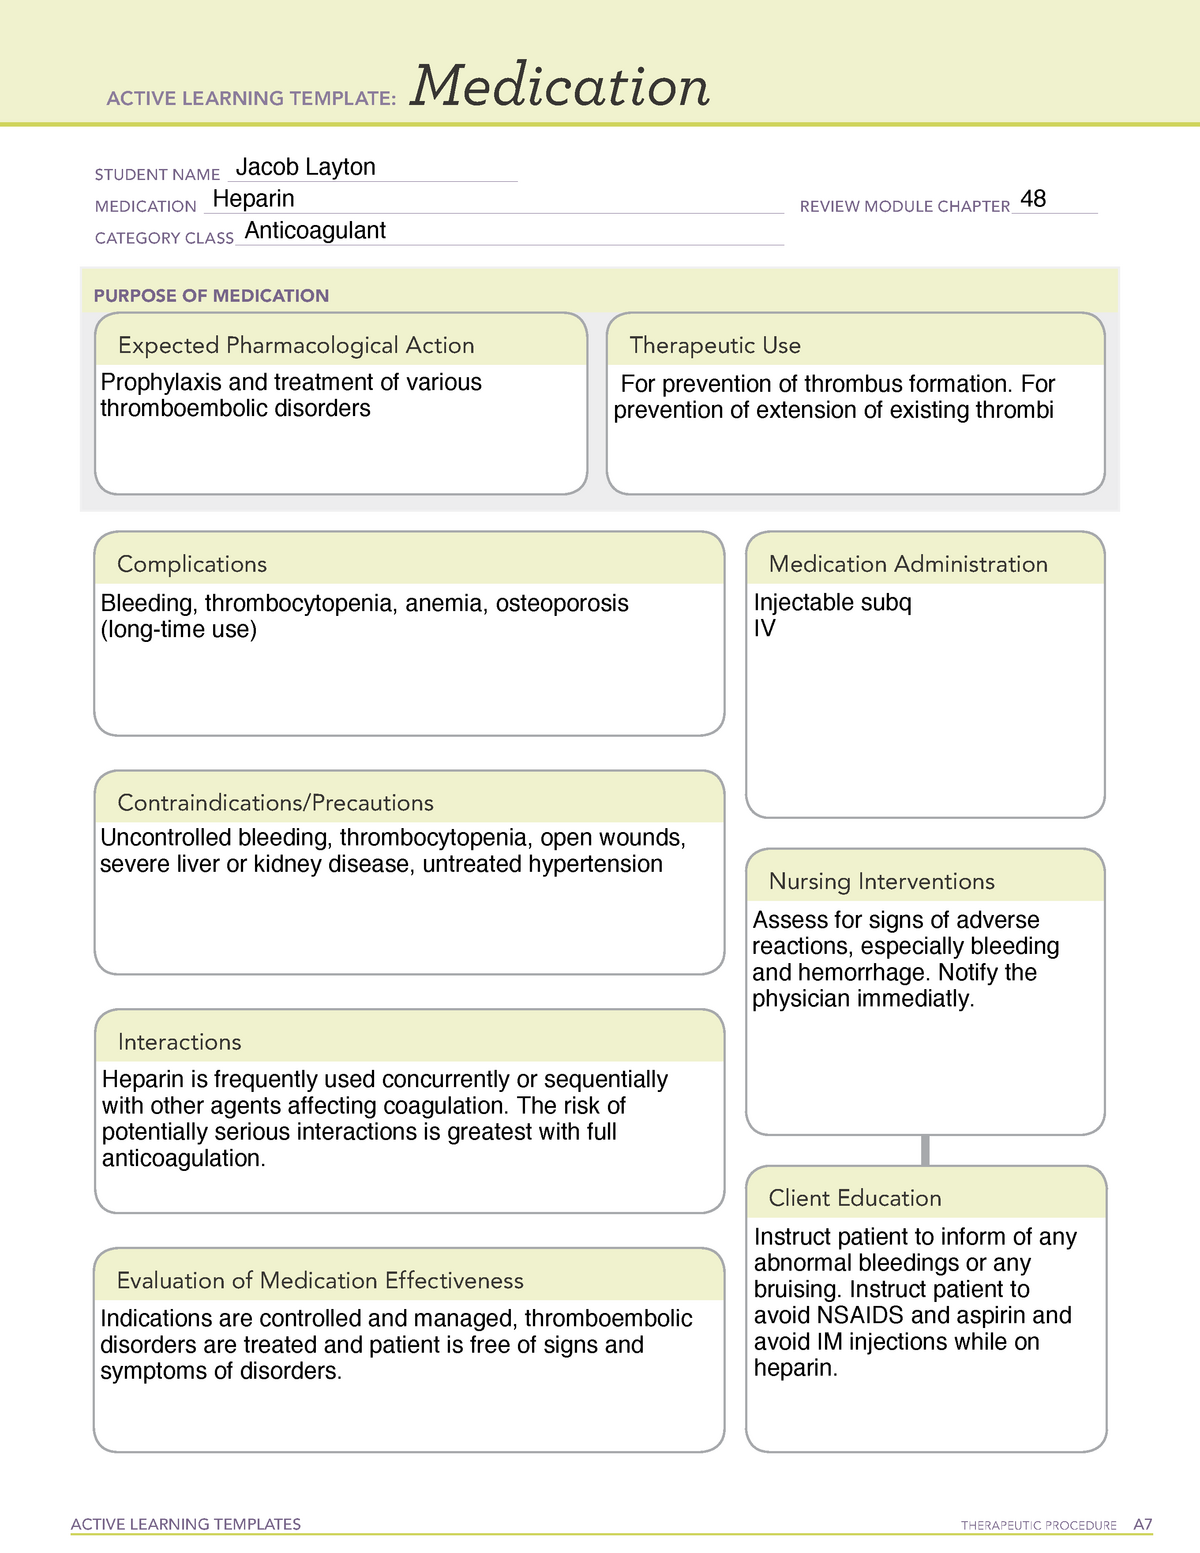 Focused Review (Heparin) ACTIVE LEARNING TEMPLATES THERAPEUTIC